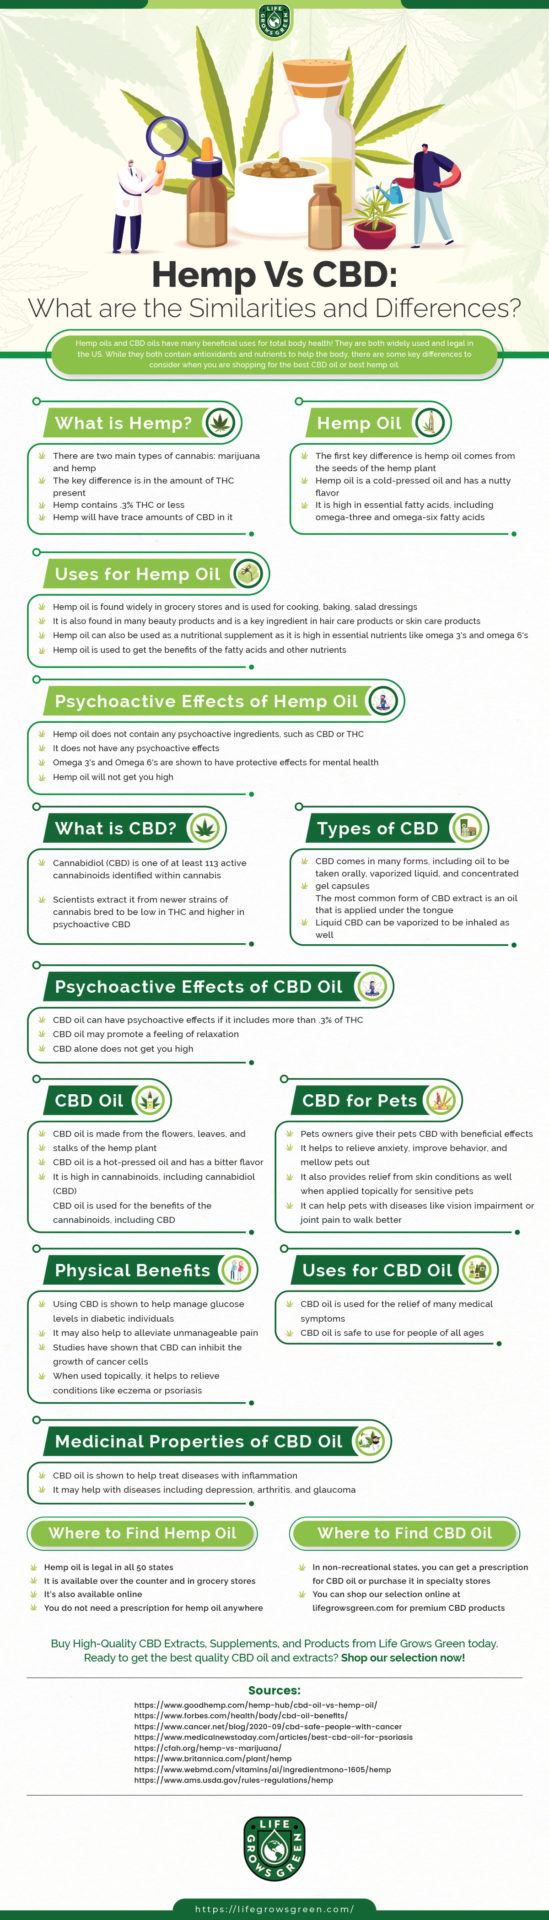 Hemp Vs CBD: What are the Similarities and Differences?